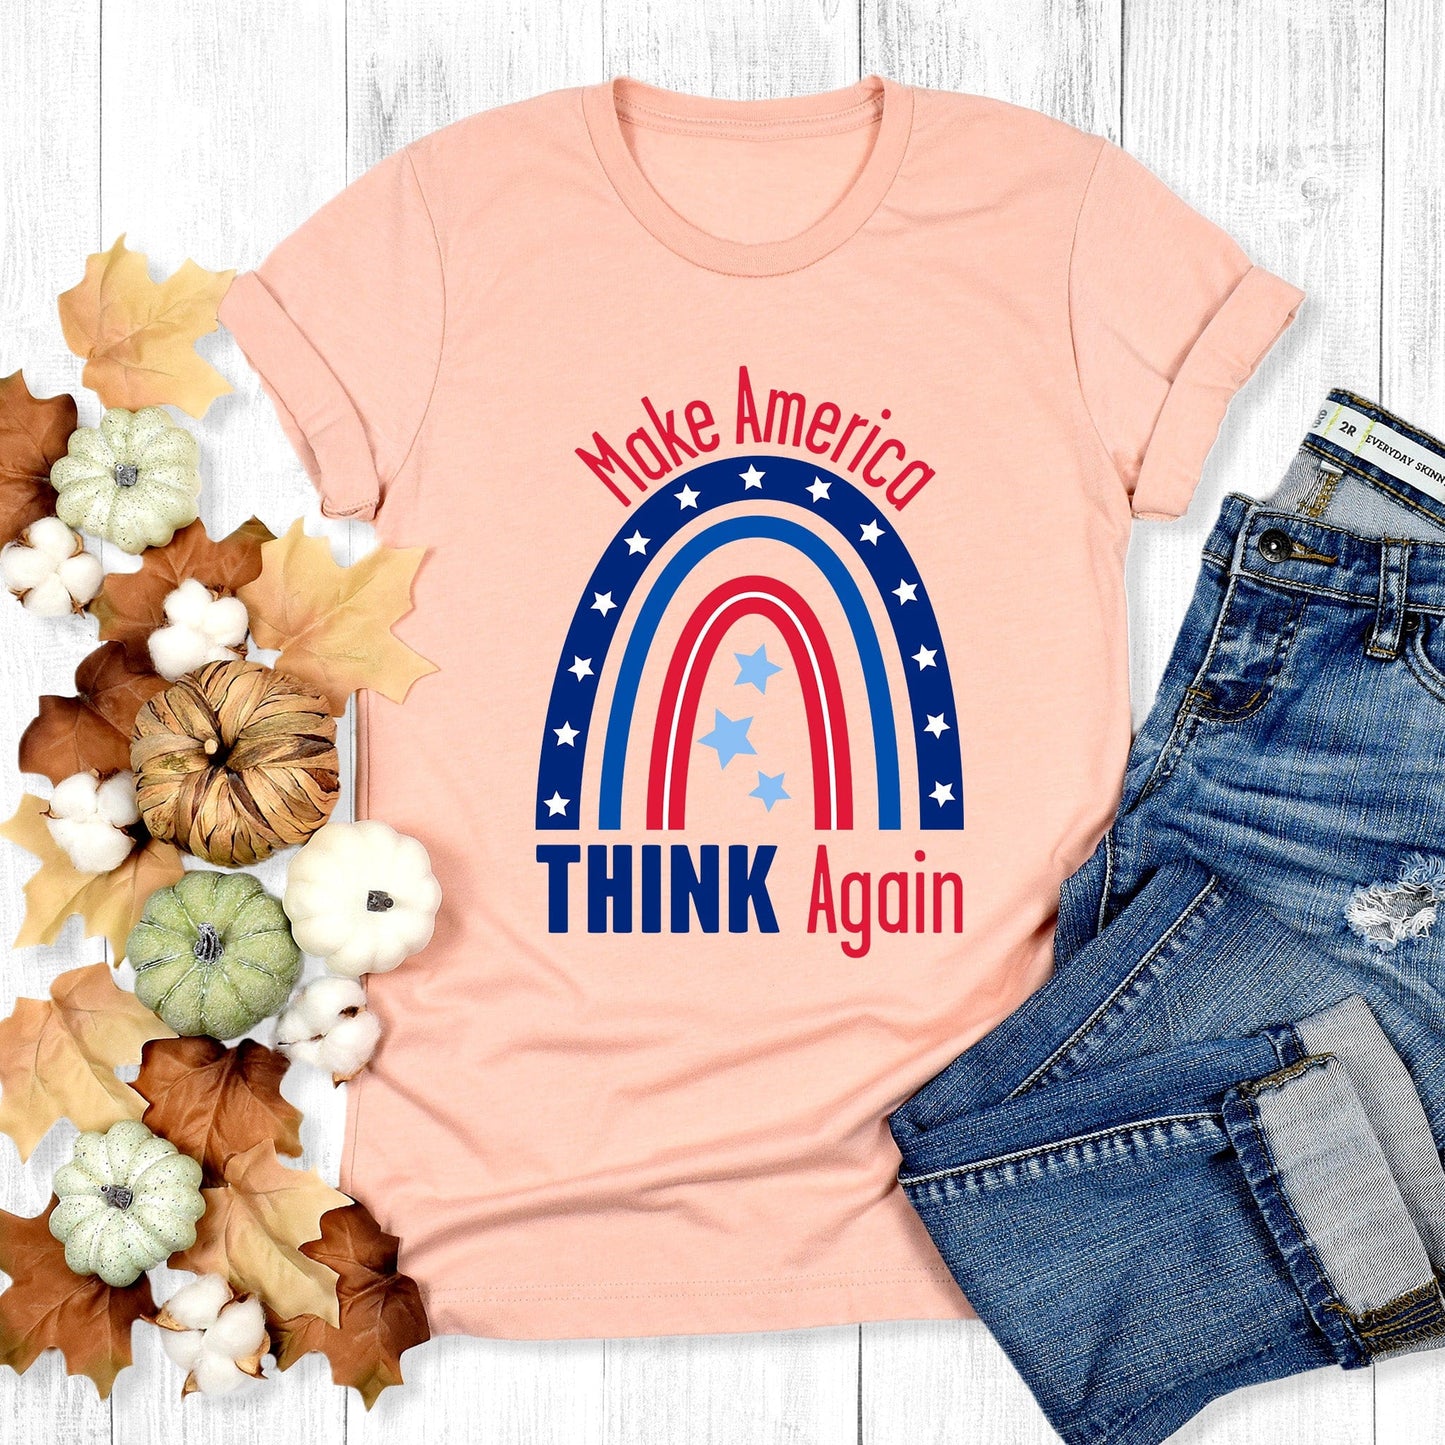 Heather Peach color unisex t-shirt that says, “Make America THINK Again” with a graphic of a blue and red rainbow. “Make America” is red and arched over the rainbow. “THINK Again” is beneath the rainbow with “THINK” being blue and “Again” being red.